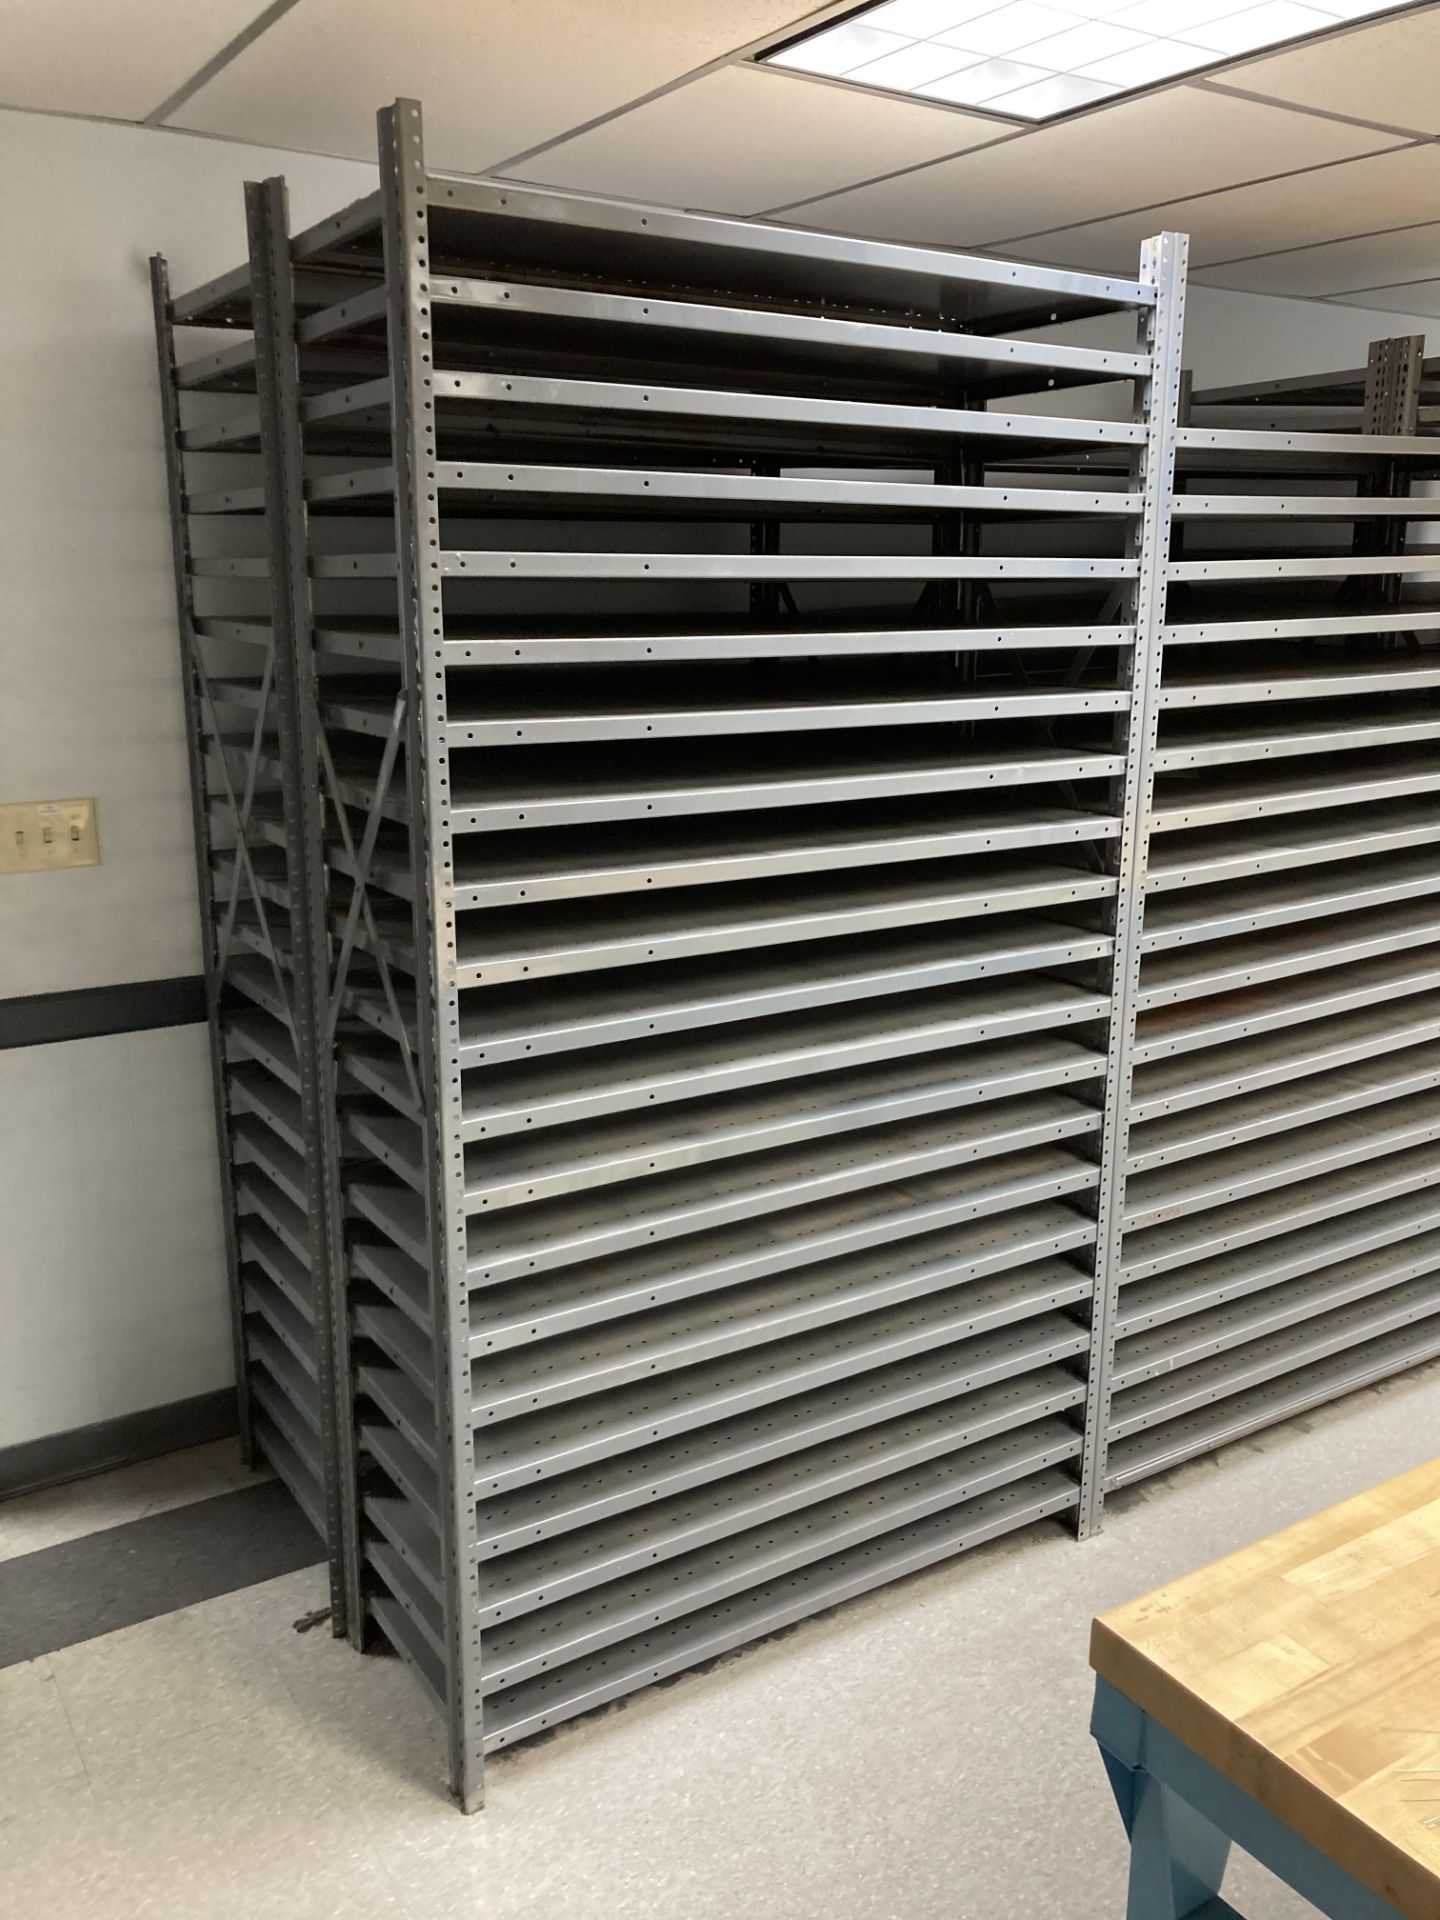 Lot of (6) Sections of 48" x 18" x 87" Shelving - Image 3 of 4